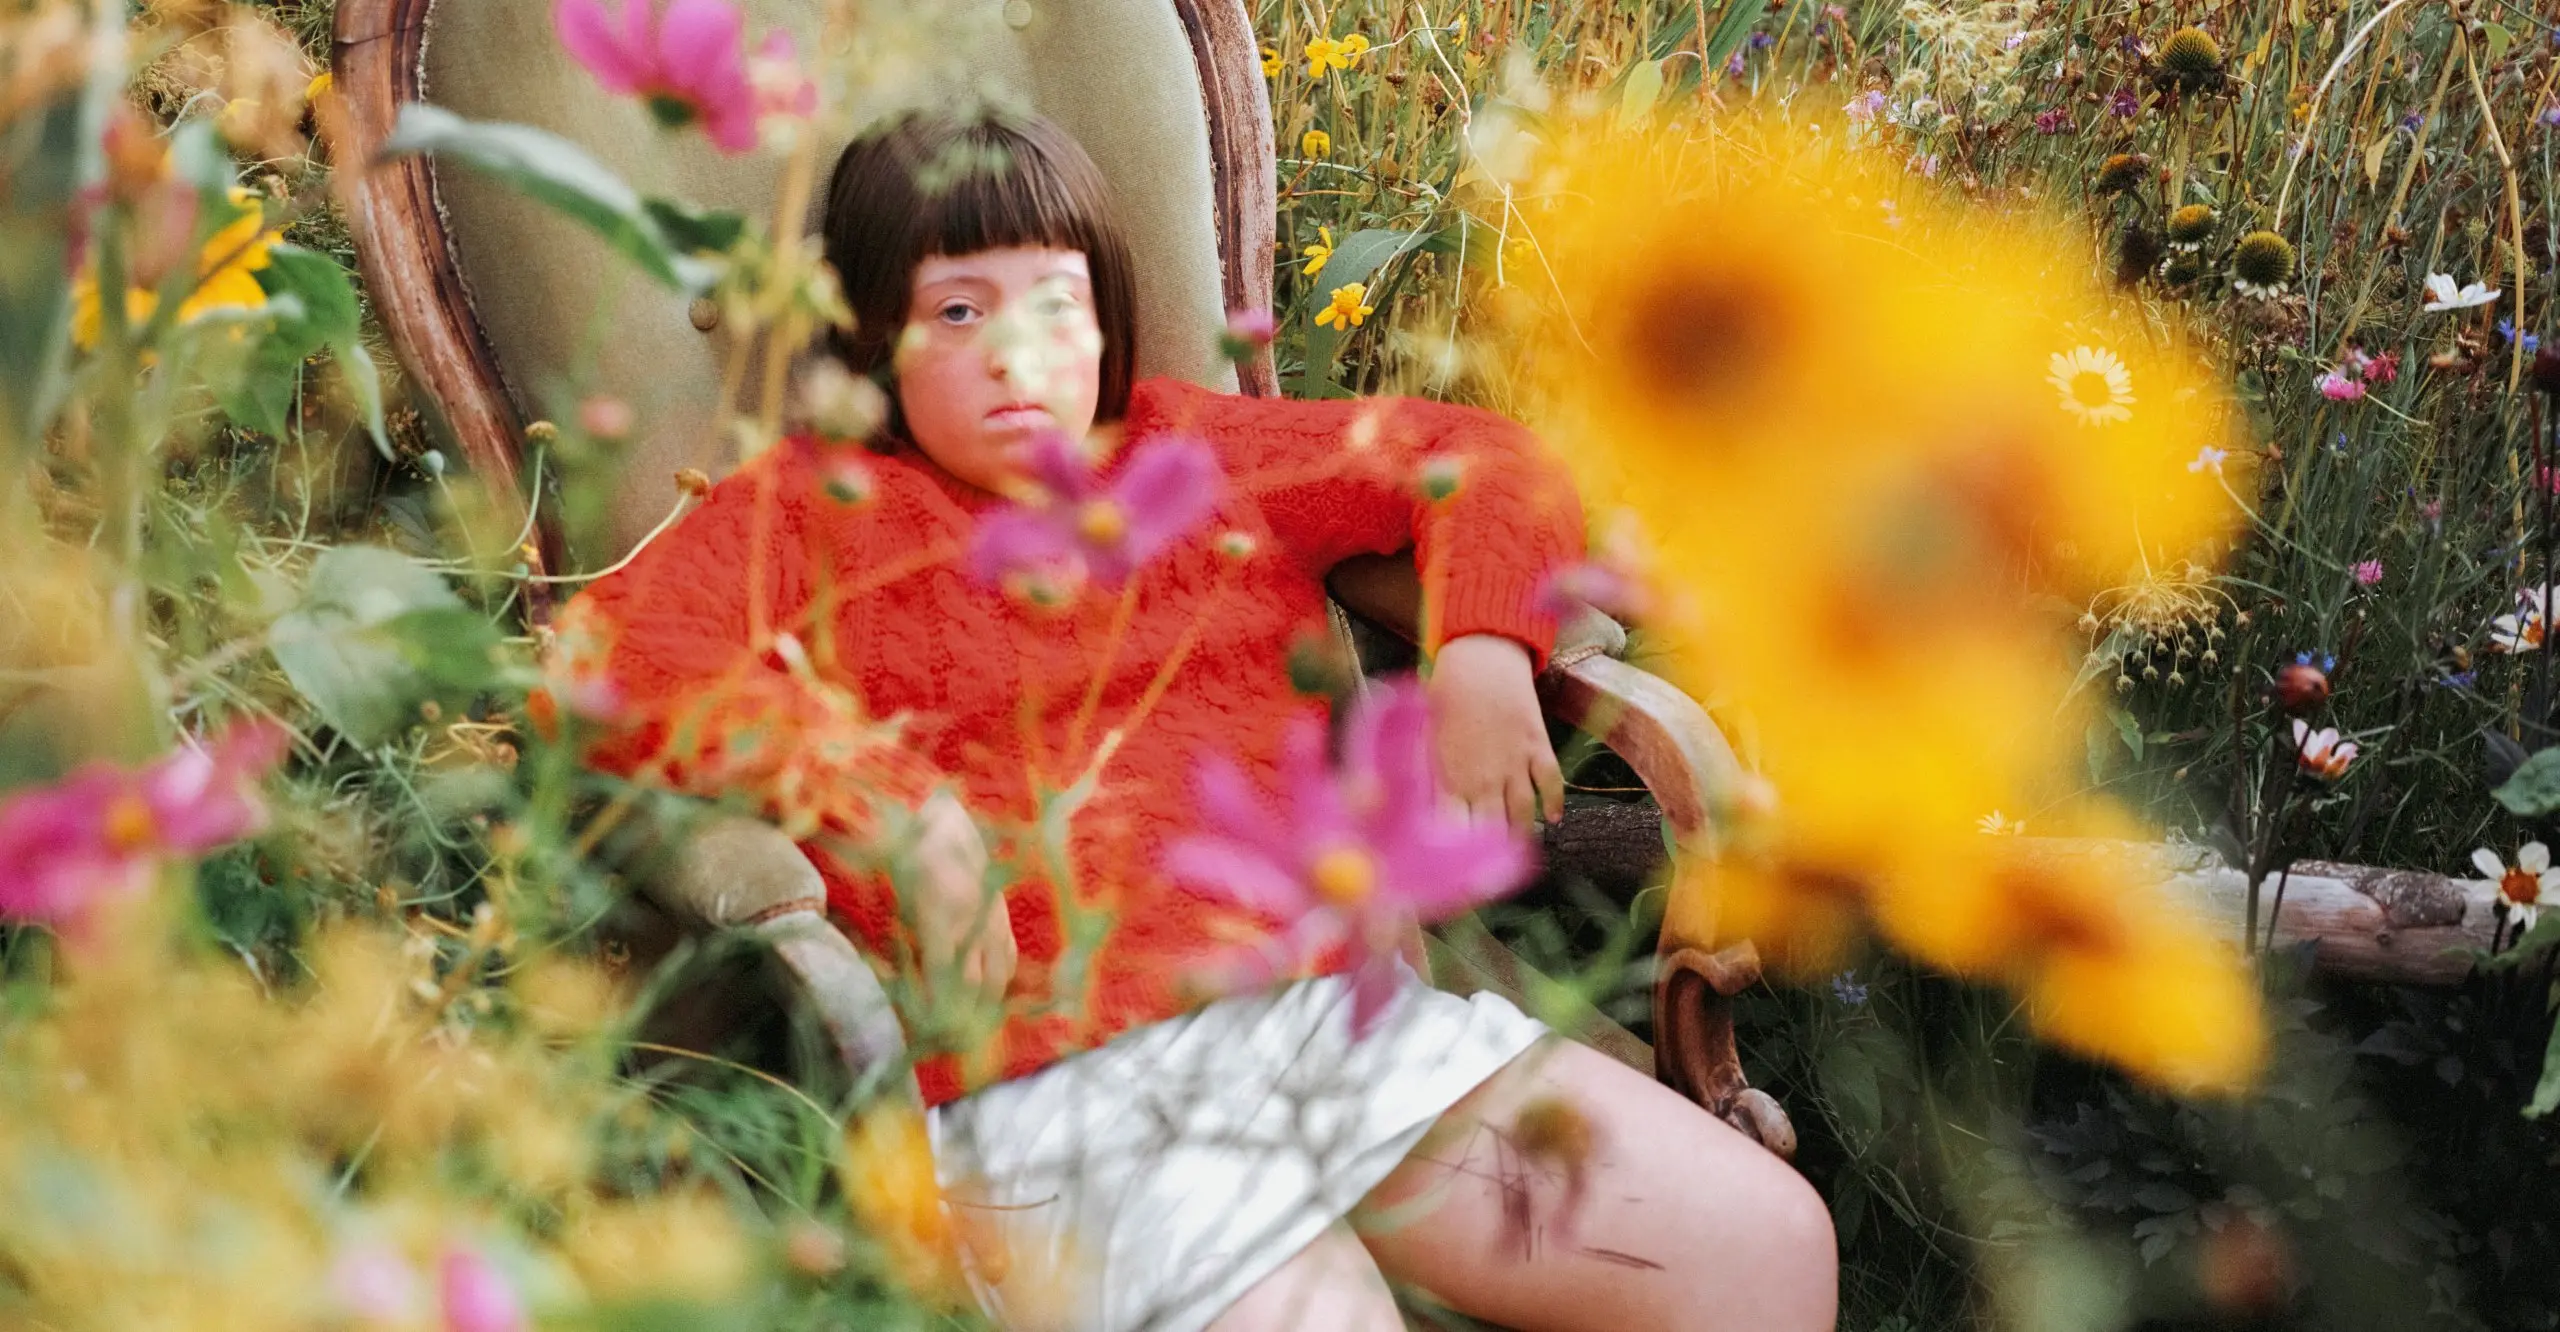 Colour photograph of a young person sat in an armchair in the middle of a garden with flowers in the foreground